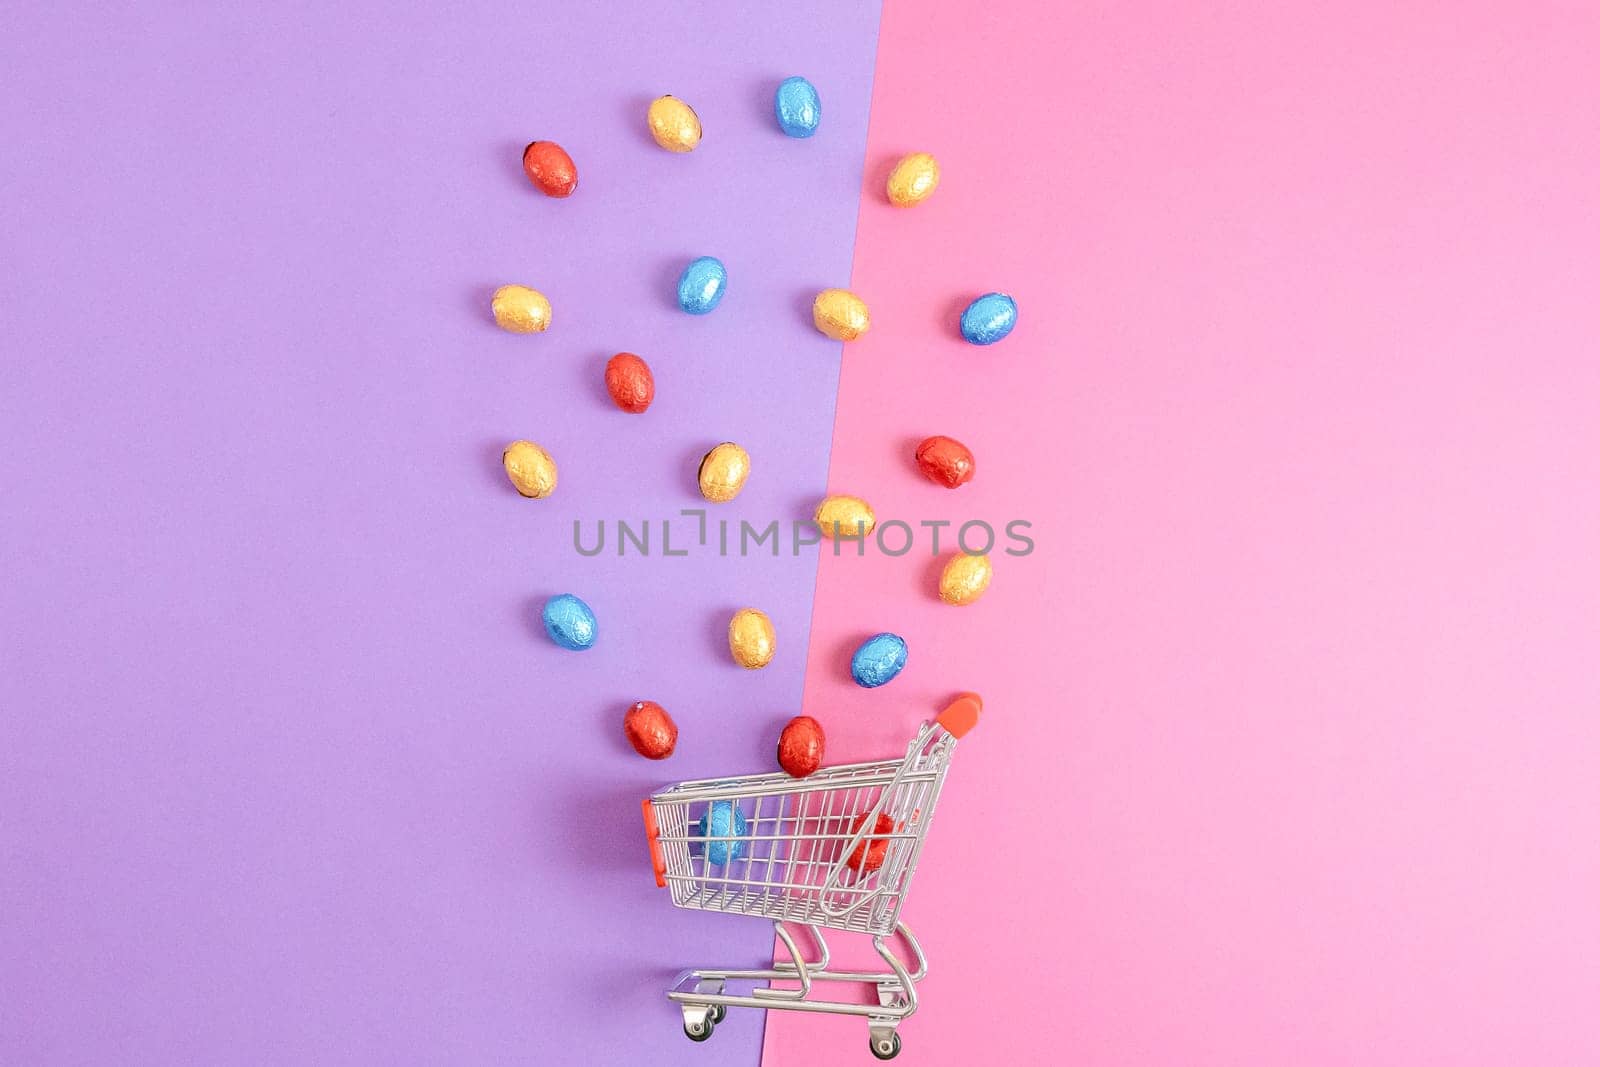 Chocolate Easter eggs in shiny multi-colored wrappers spill out of a mini shopping cart, lie in the center on a lilac-pink background with copy space on the sides, flat lay close-up. Easter shopping concept.